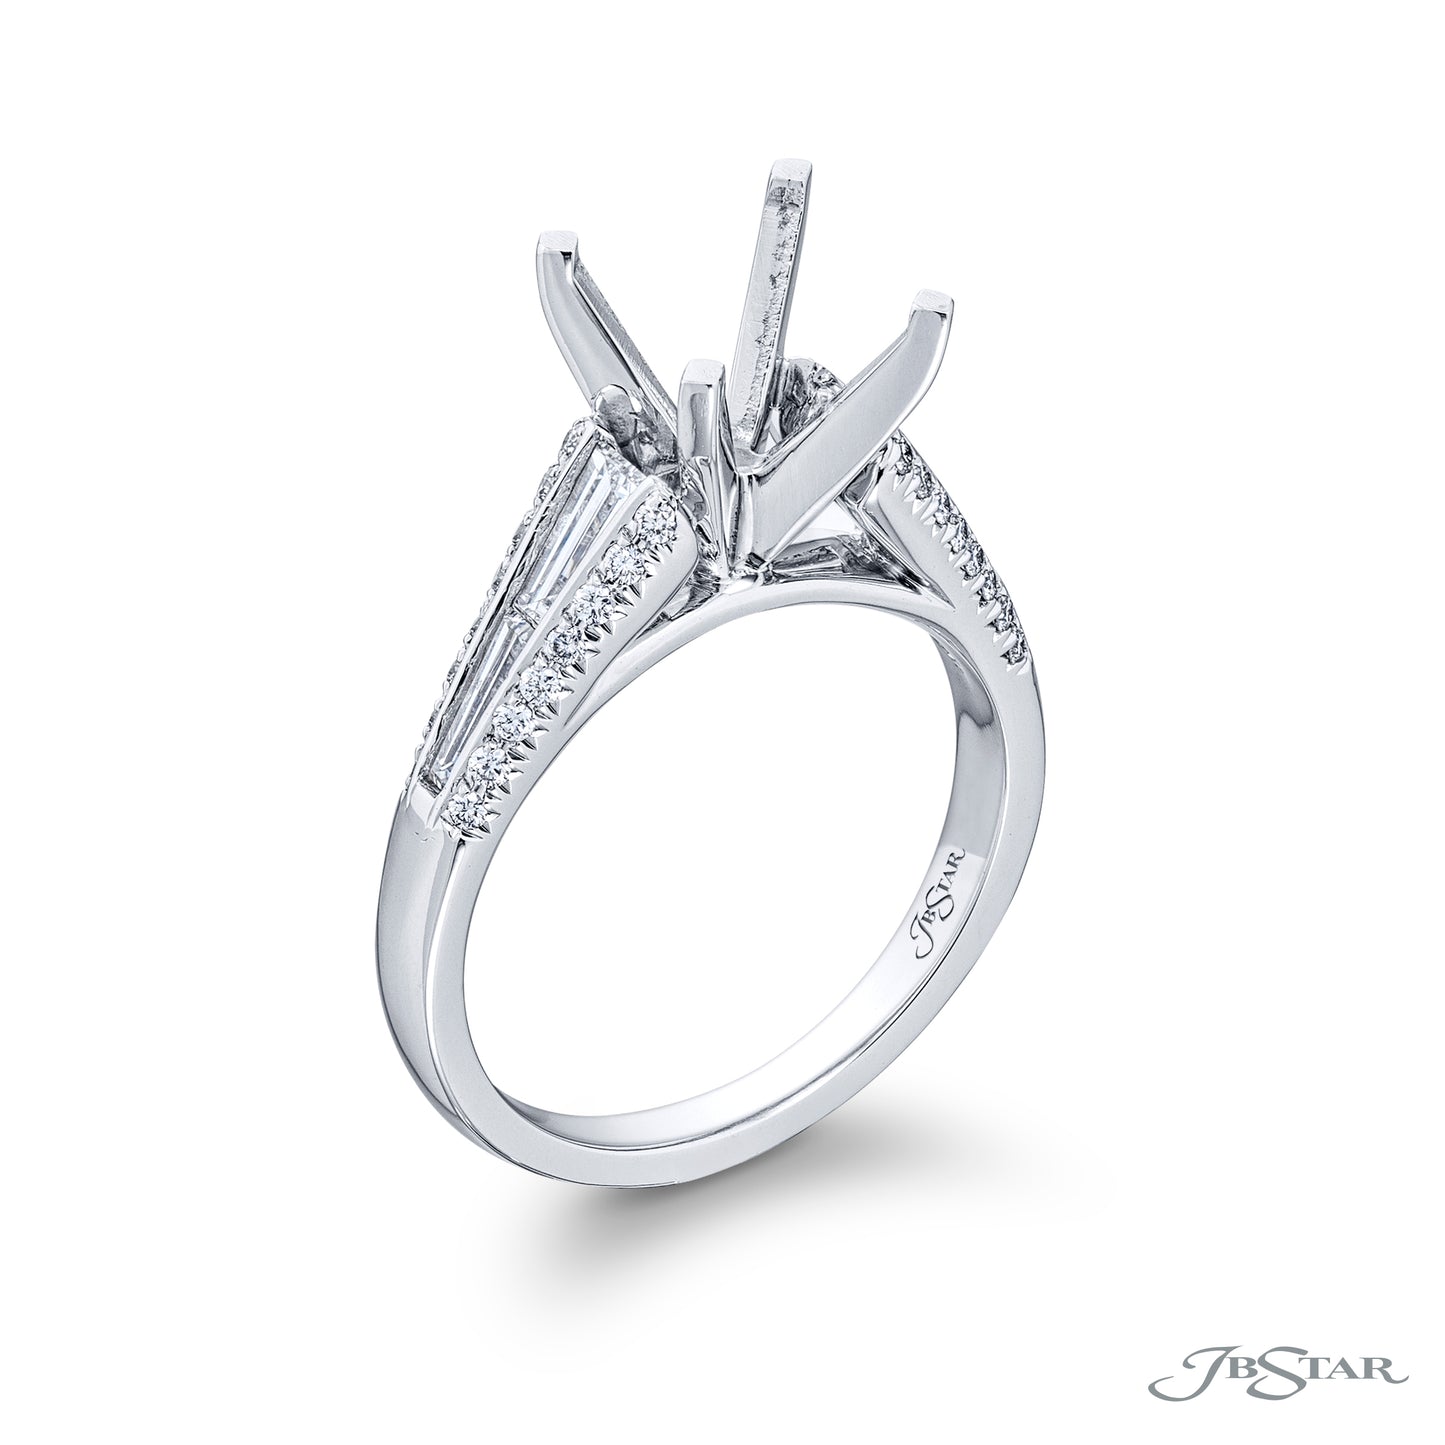 JB Star Platinum Channel and Pavé Set Tapered Baguette and Round Brilliant Diamond Semi-Mount Engagement Ring